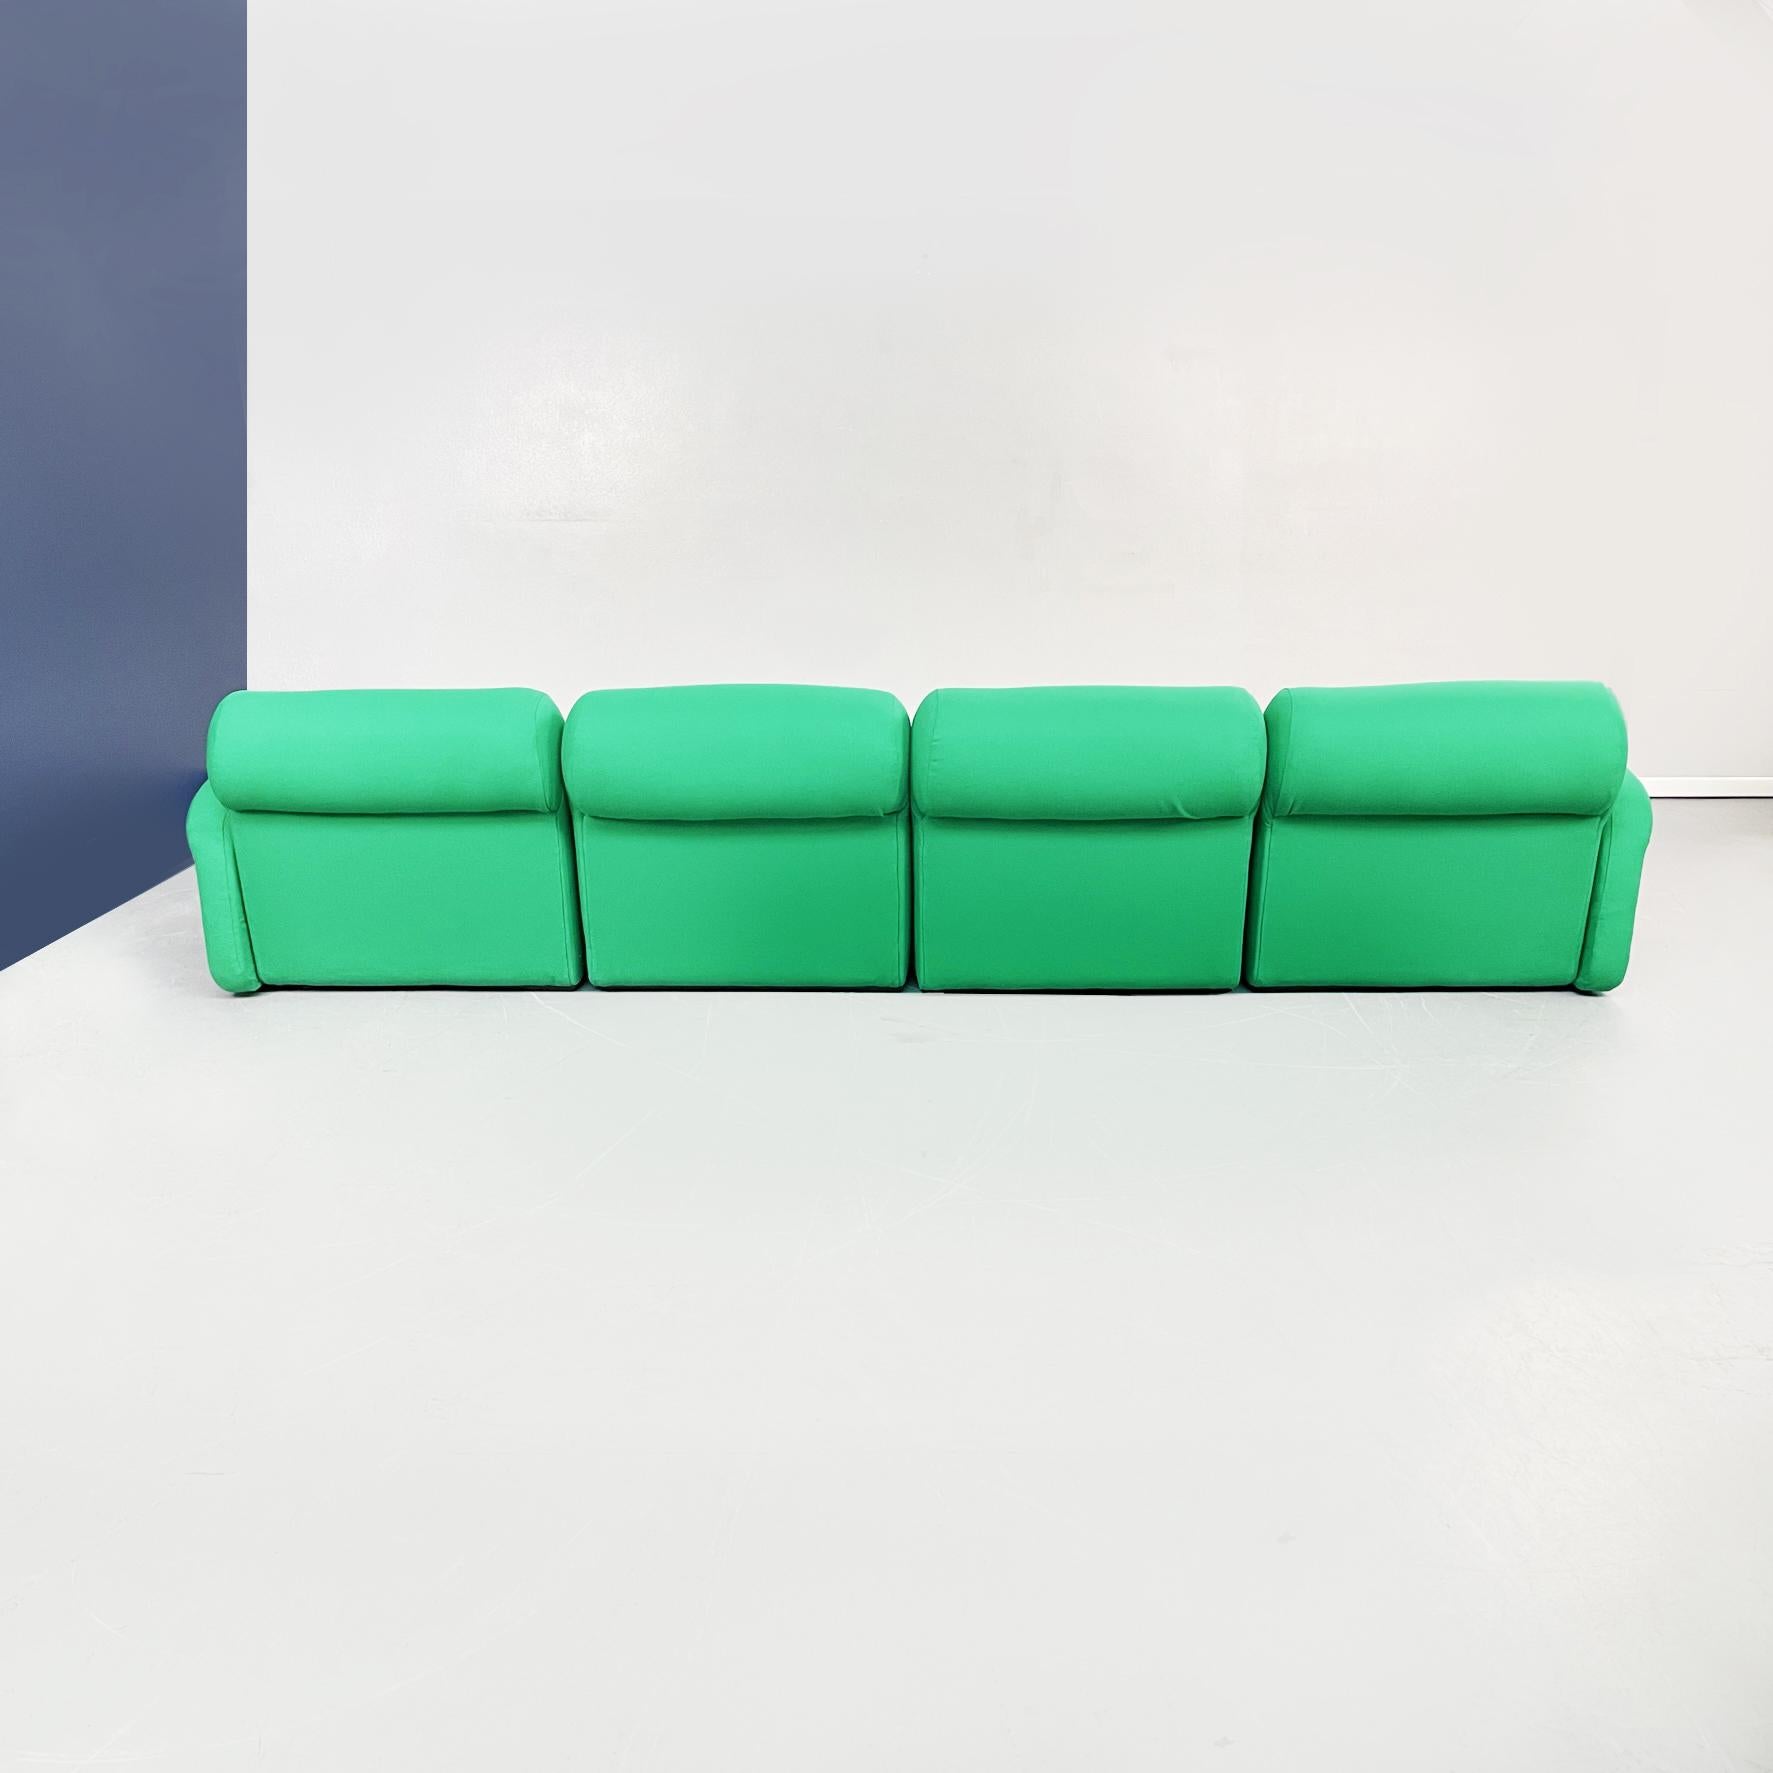 Italian Space Age Modular Sofa in Green Fabric with Metal Insert, 1970s For Sale 1